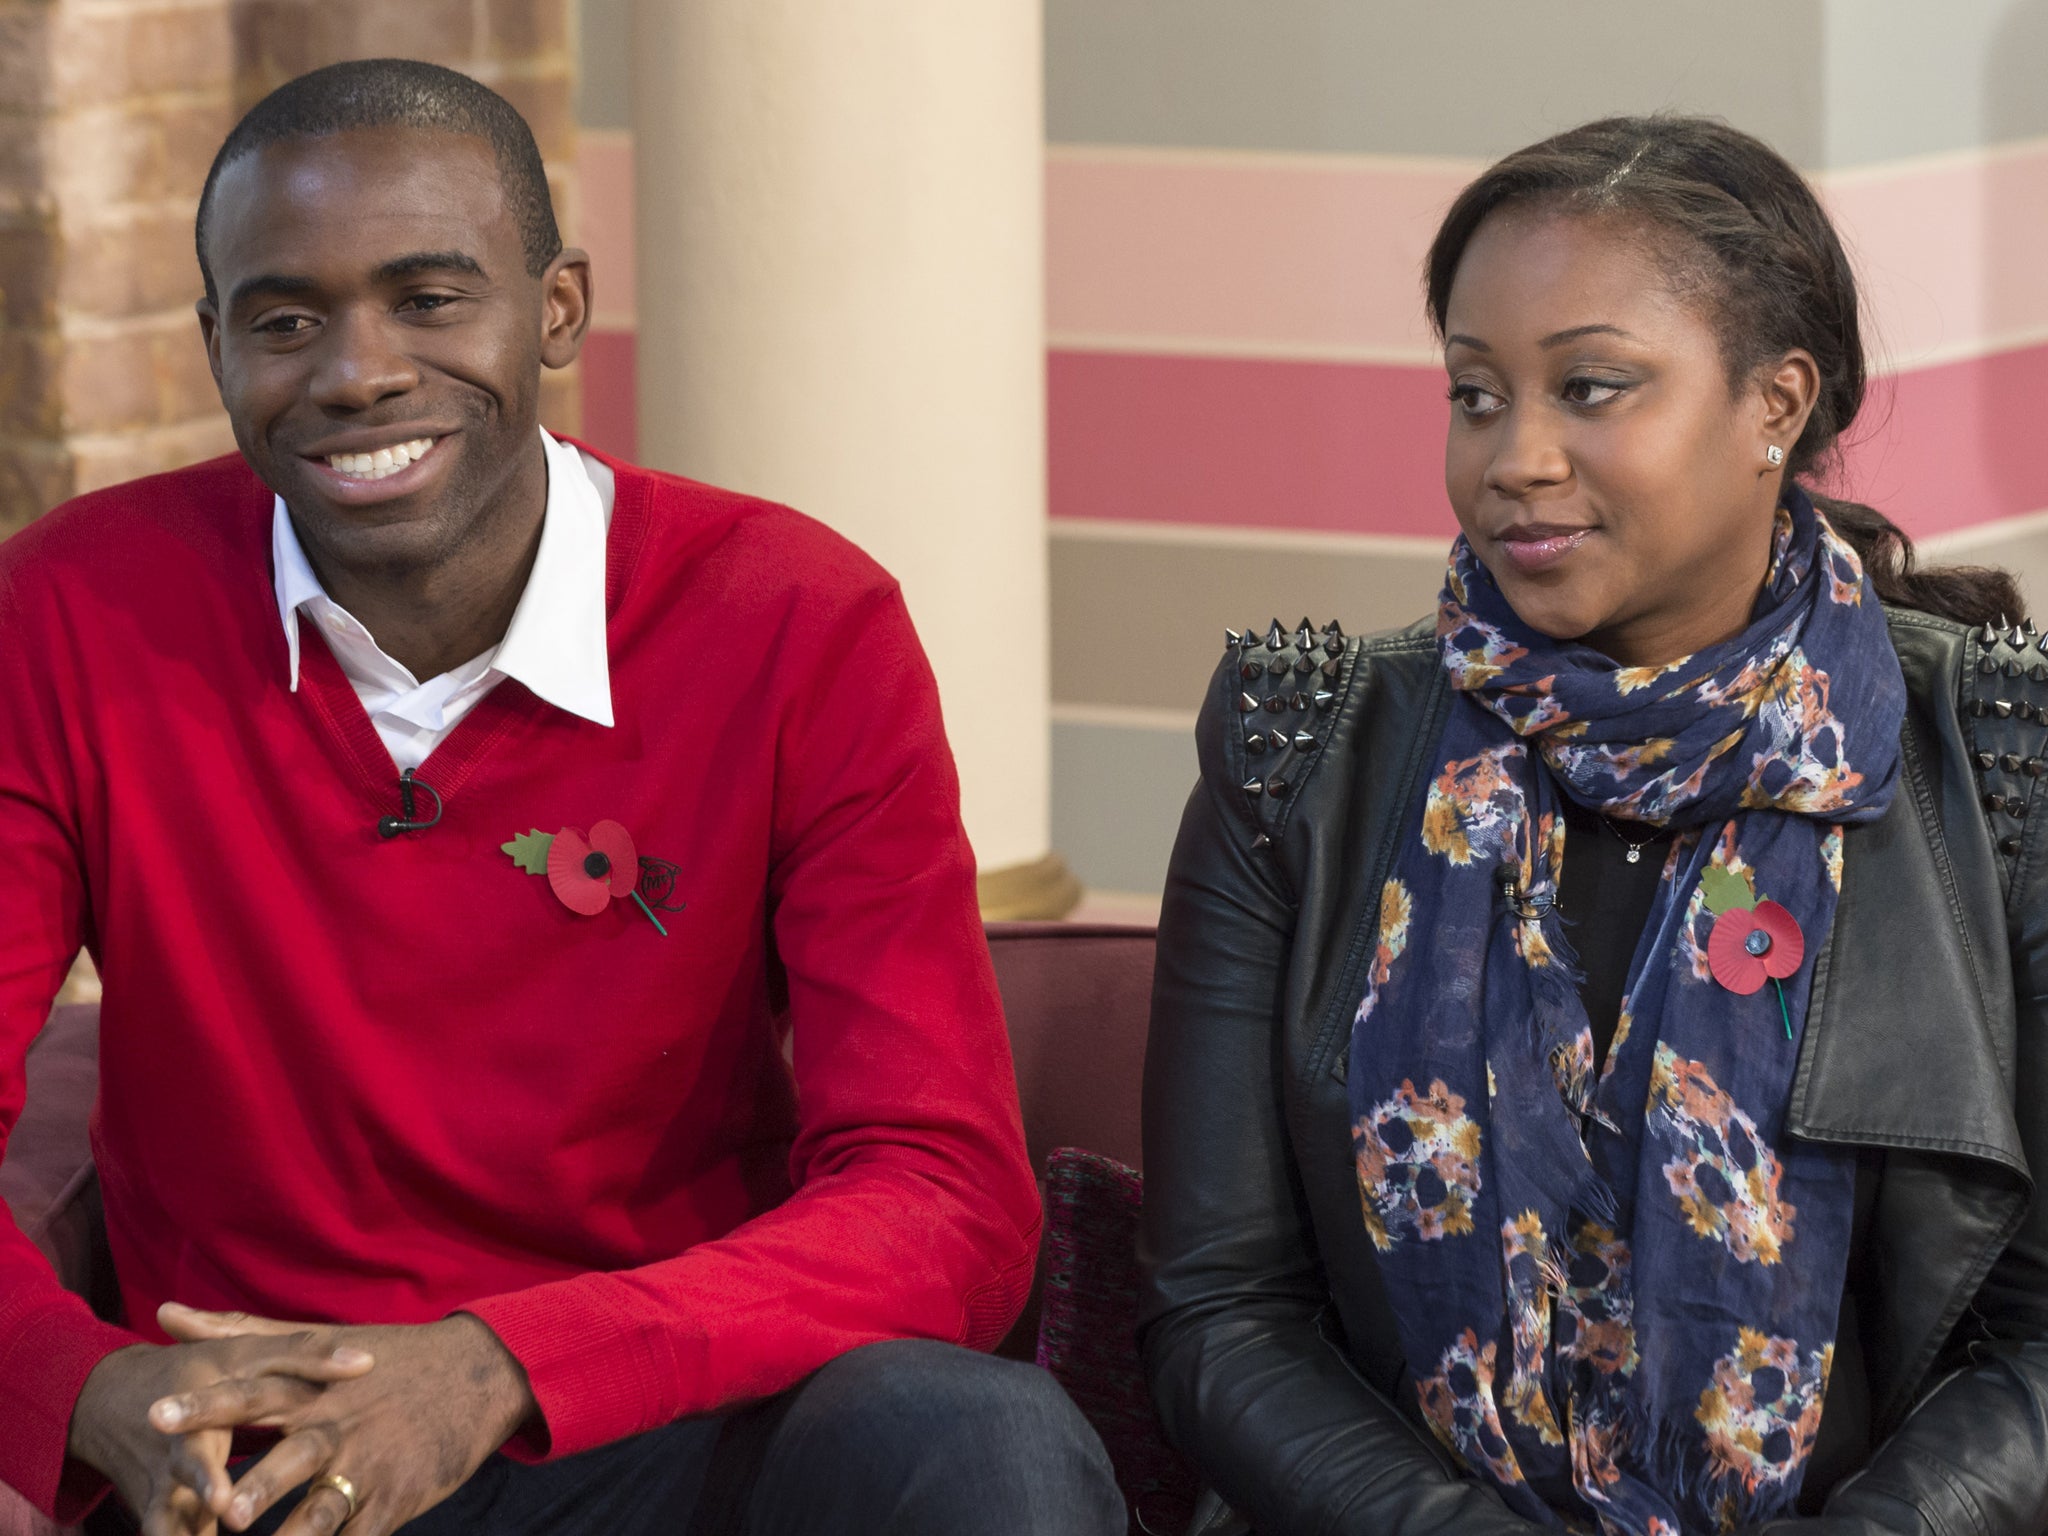 Fabrice Muamba and wife Shauna, pictured here in November last year, are said to be 'elated' at the prospect of a new baby